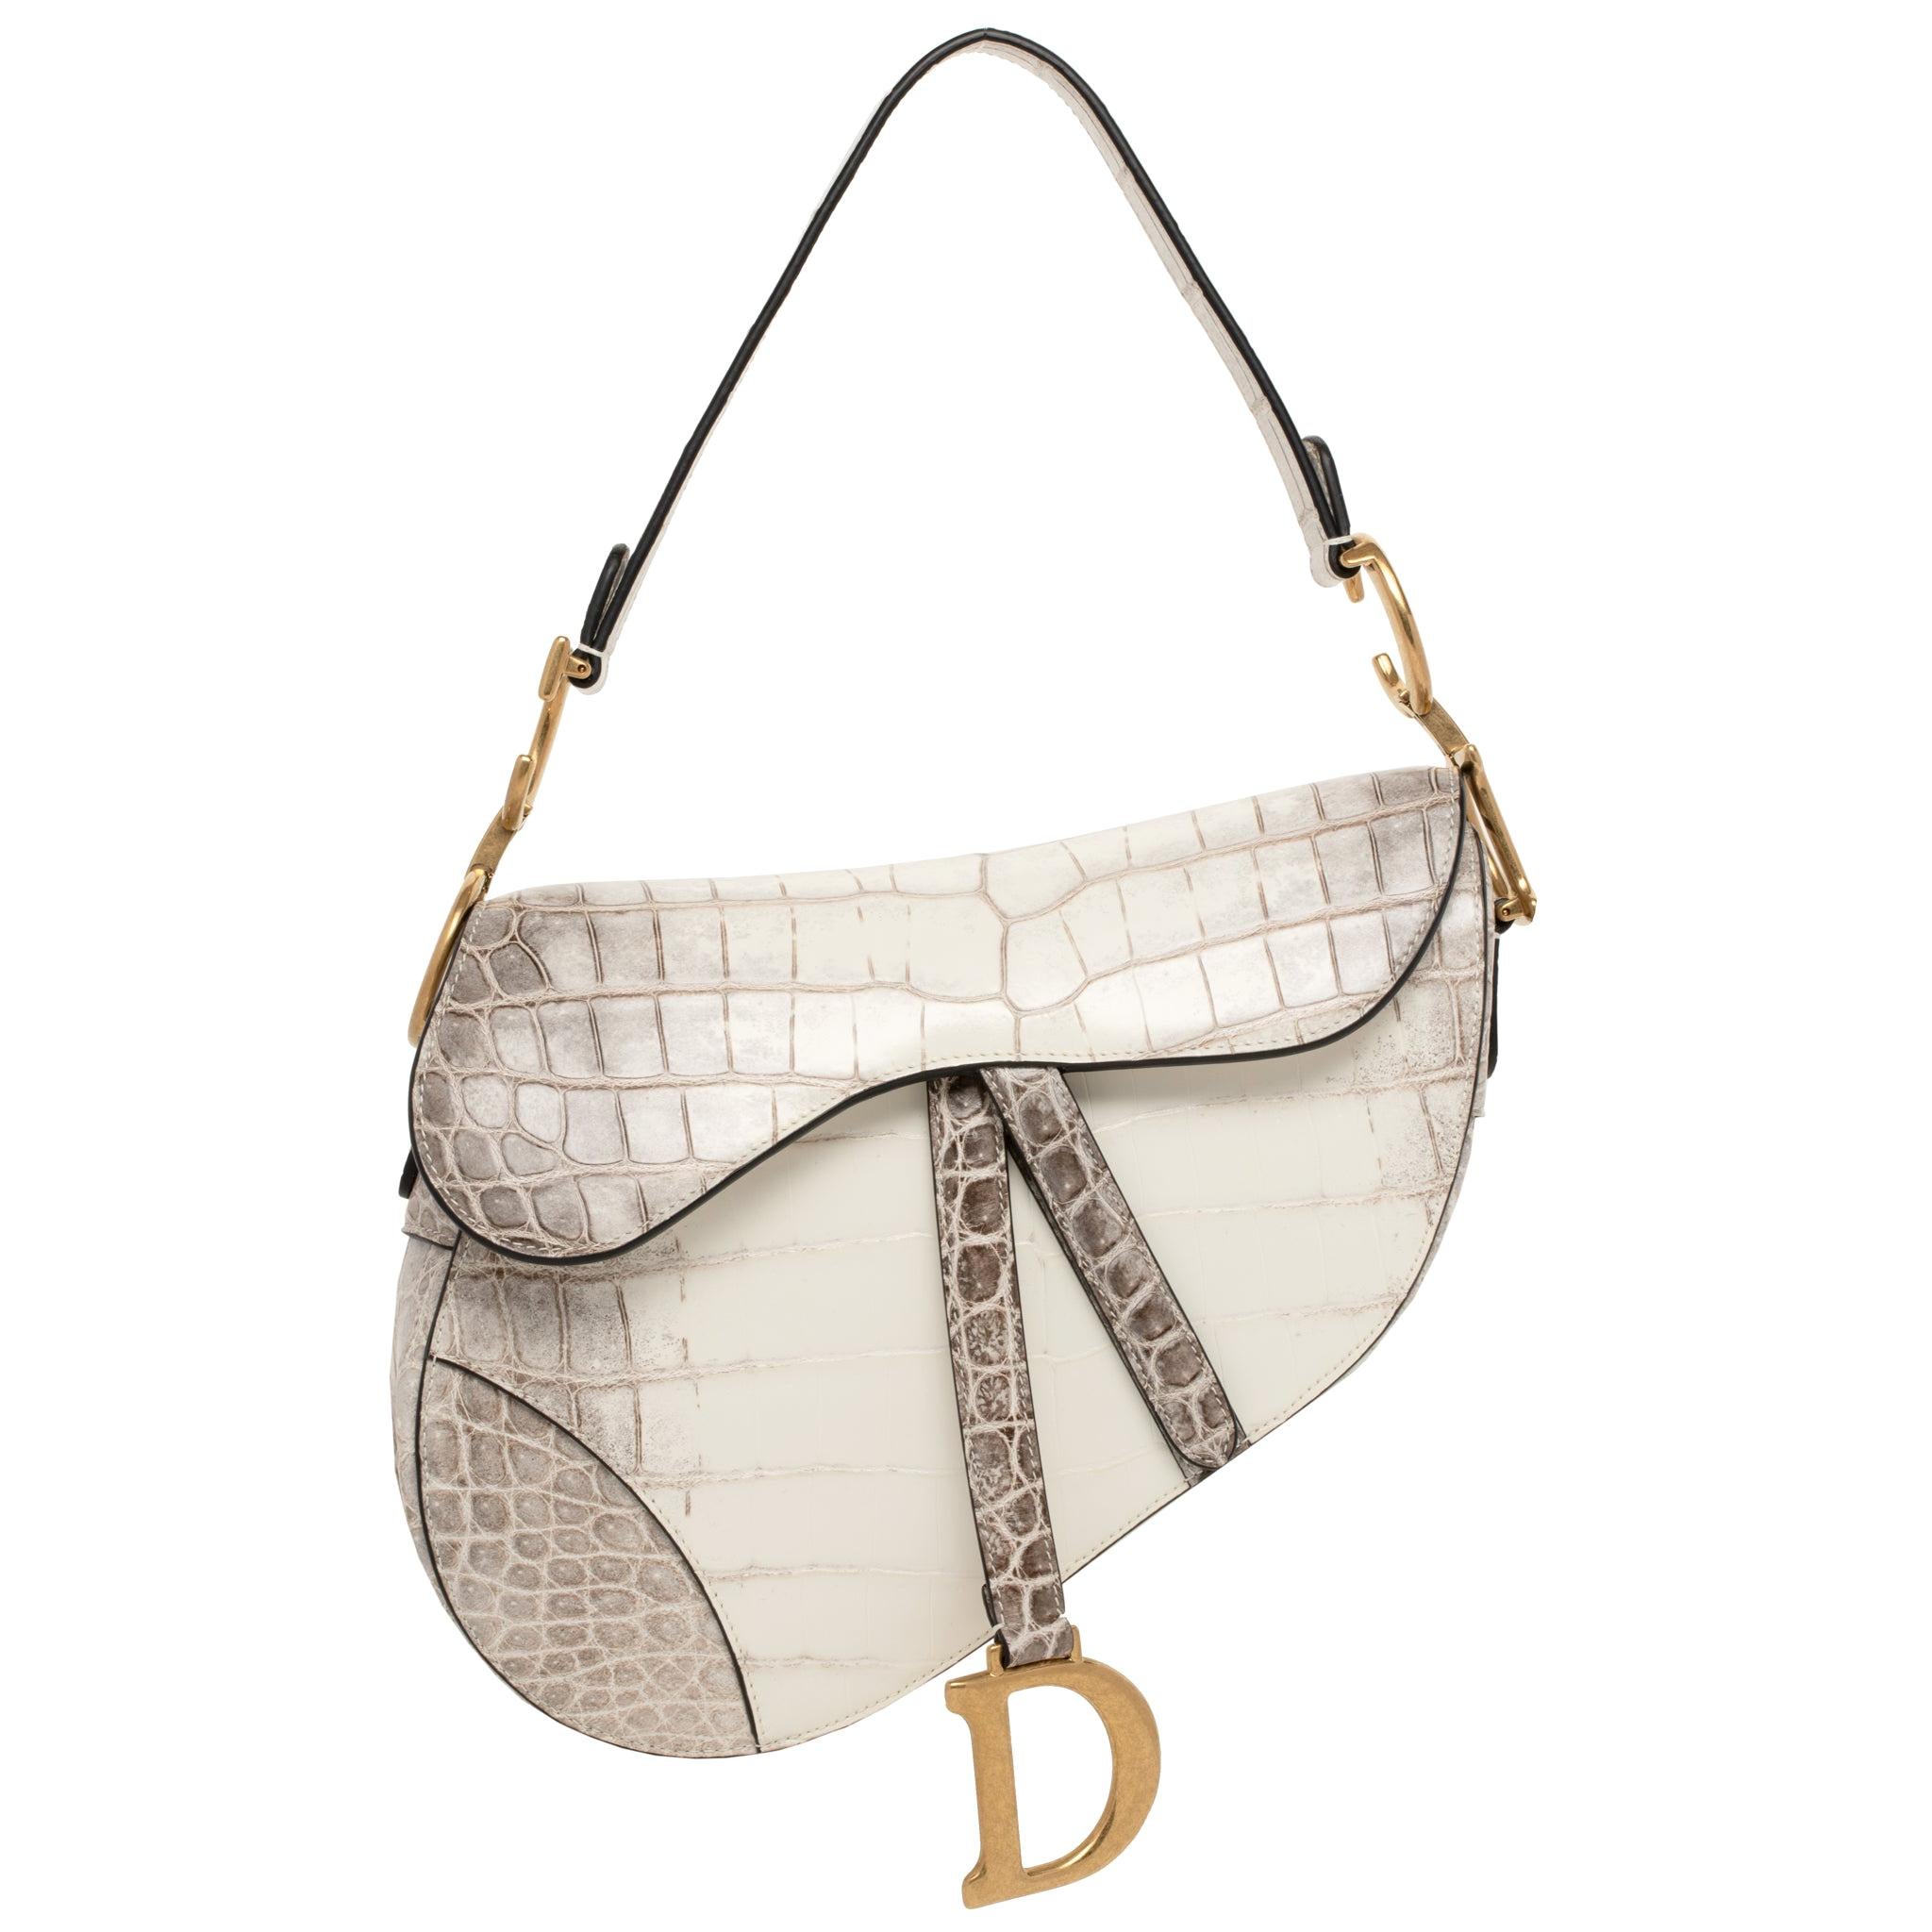 1stdibs Exclusives From Three Over Six

Brand: Christian Dior
Style: Saddle Bag
Size: Medium 25.5 x 20 x 6.5 cm
Color: Blanc Casse Himalayan
Leather: Matte Niloticus Crocodile
Hardware: Aged Gold
Year of Production: 2019

Condition: Pristine, never